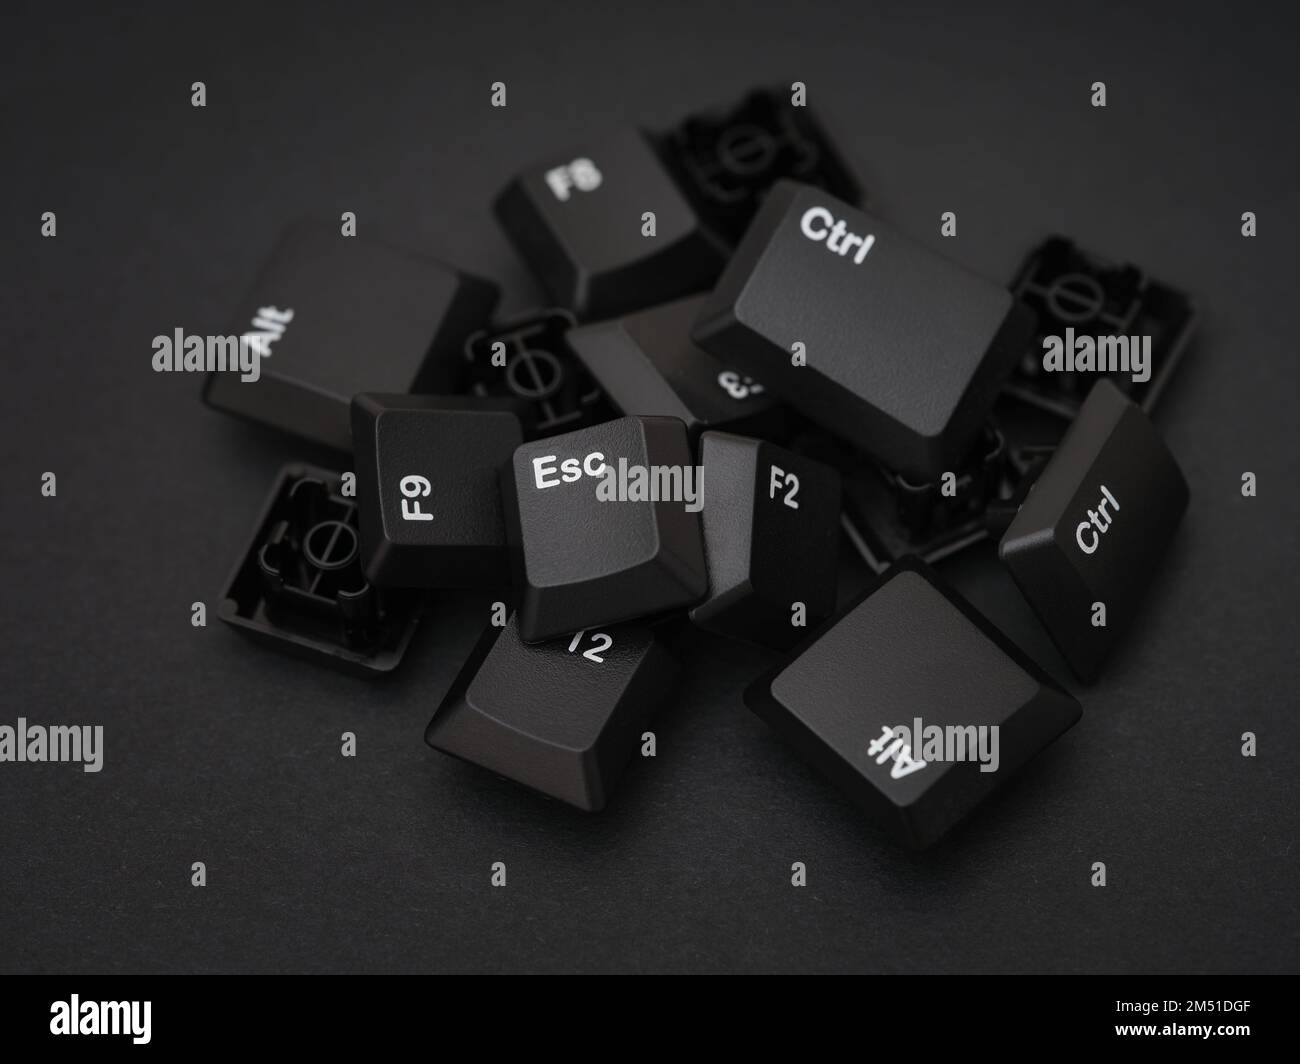 A pile of computer keys on a black background. Close-up. Stock Photo